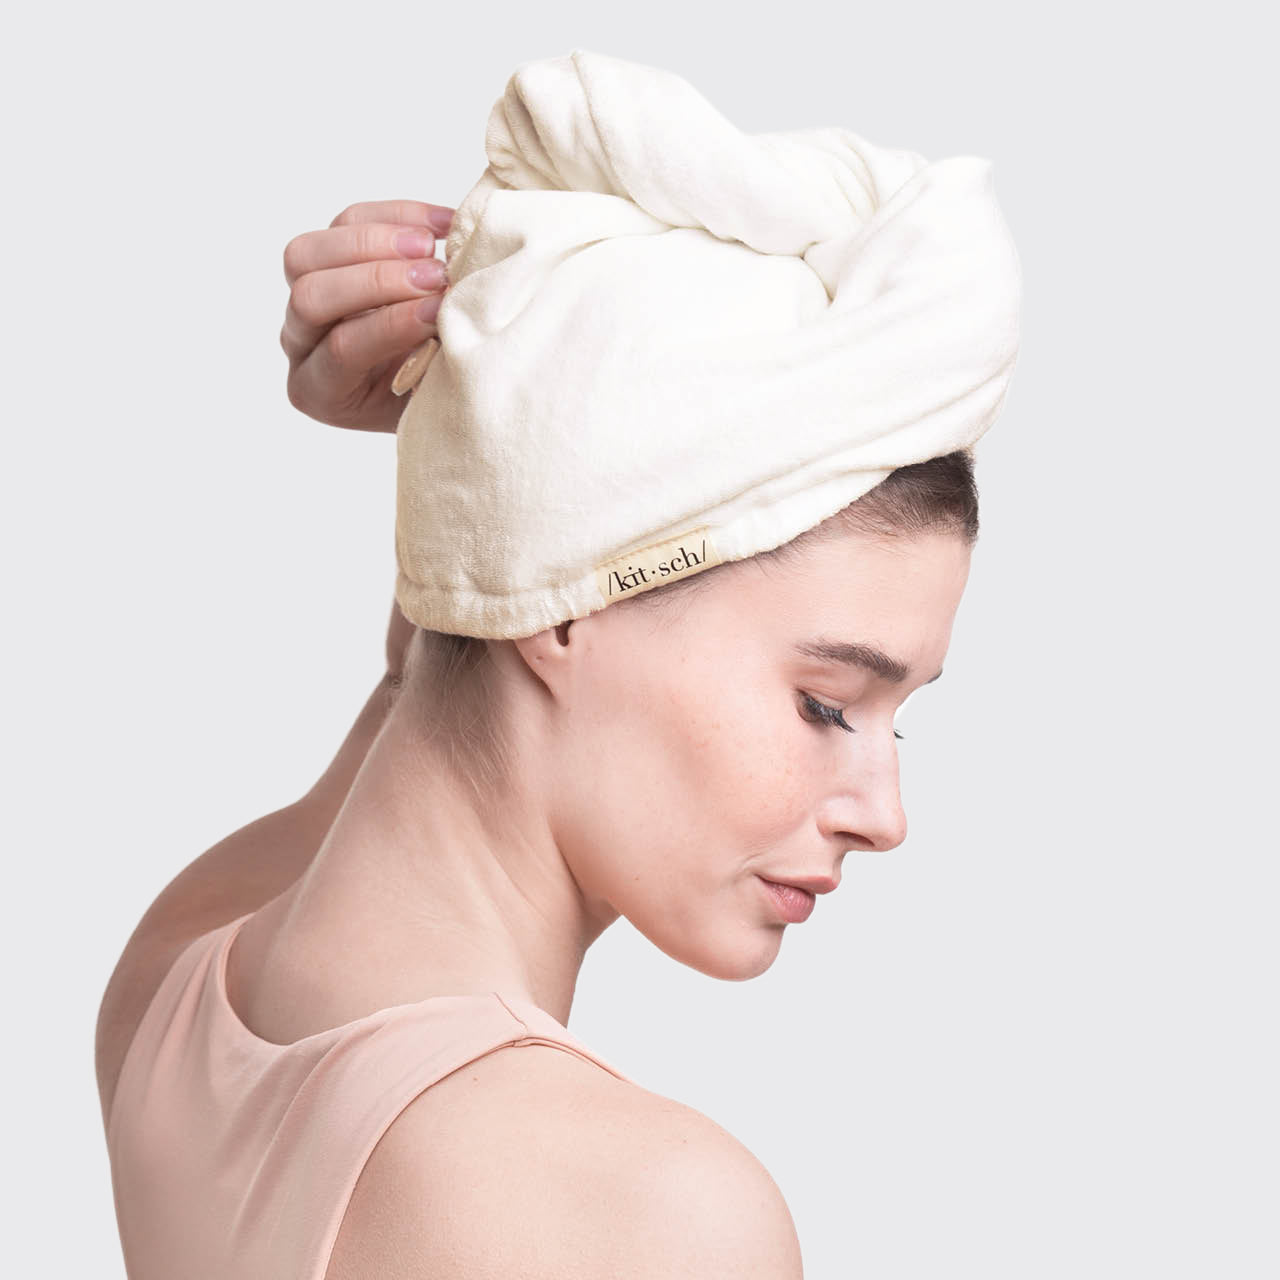 Eco-friendly Bamboo & Organic Cotton hair towel by KITSCH